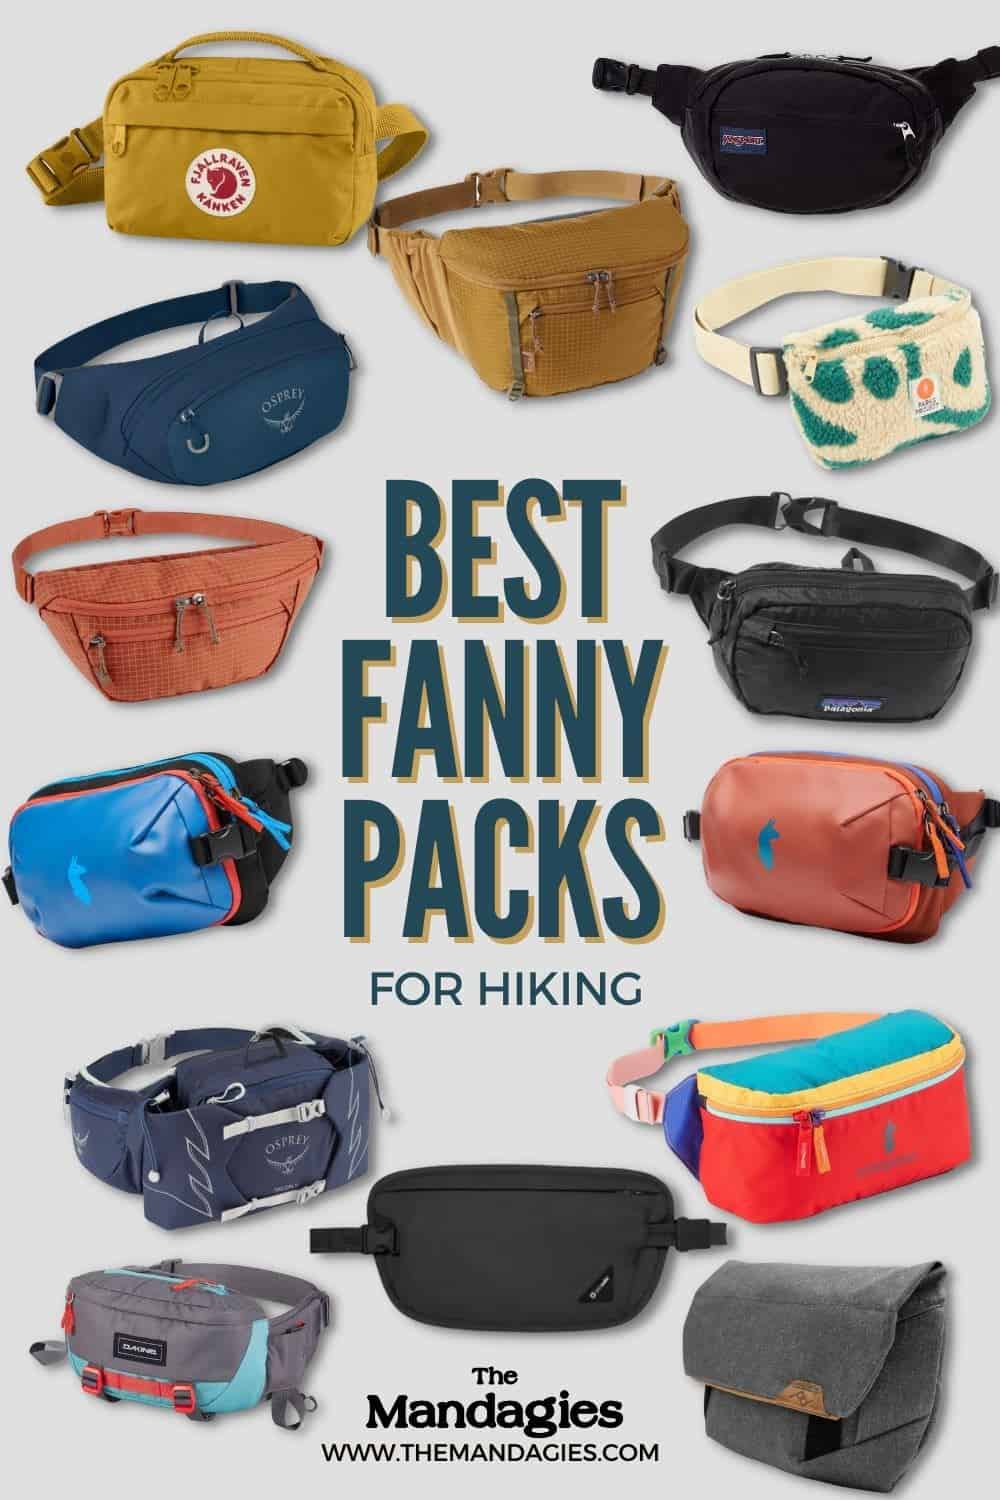 The 14 Best Fanny Packs For Hiking and Outdoor Adventure